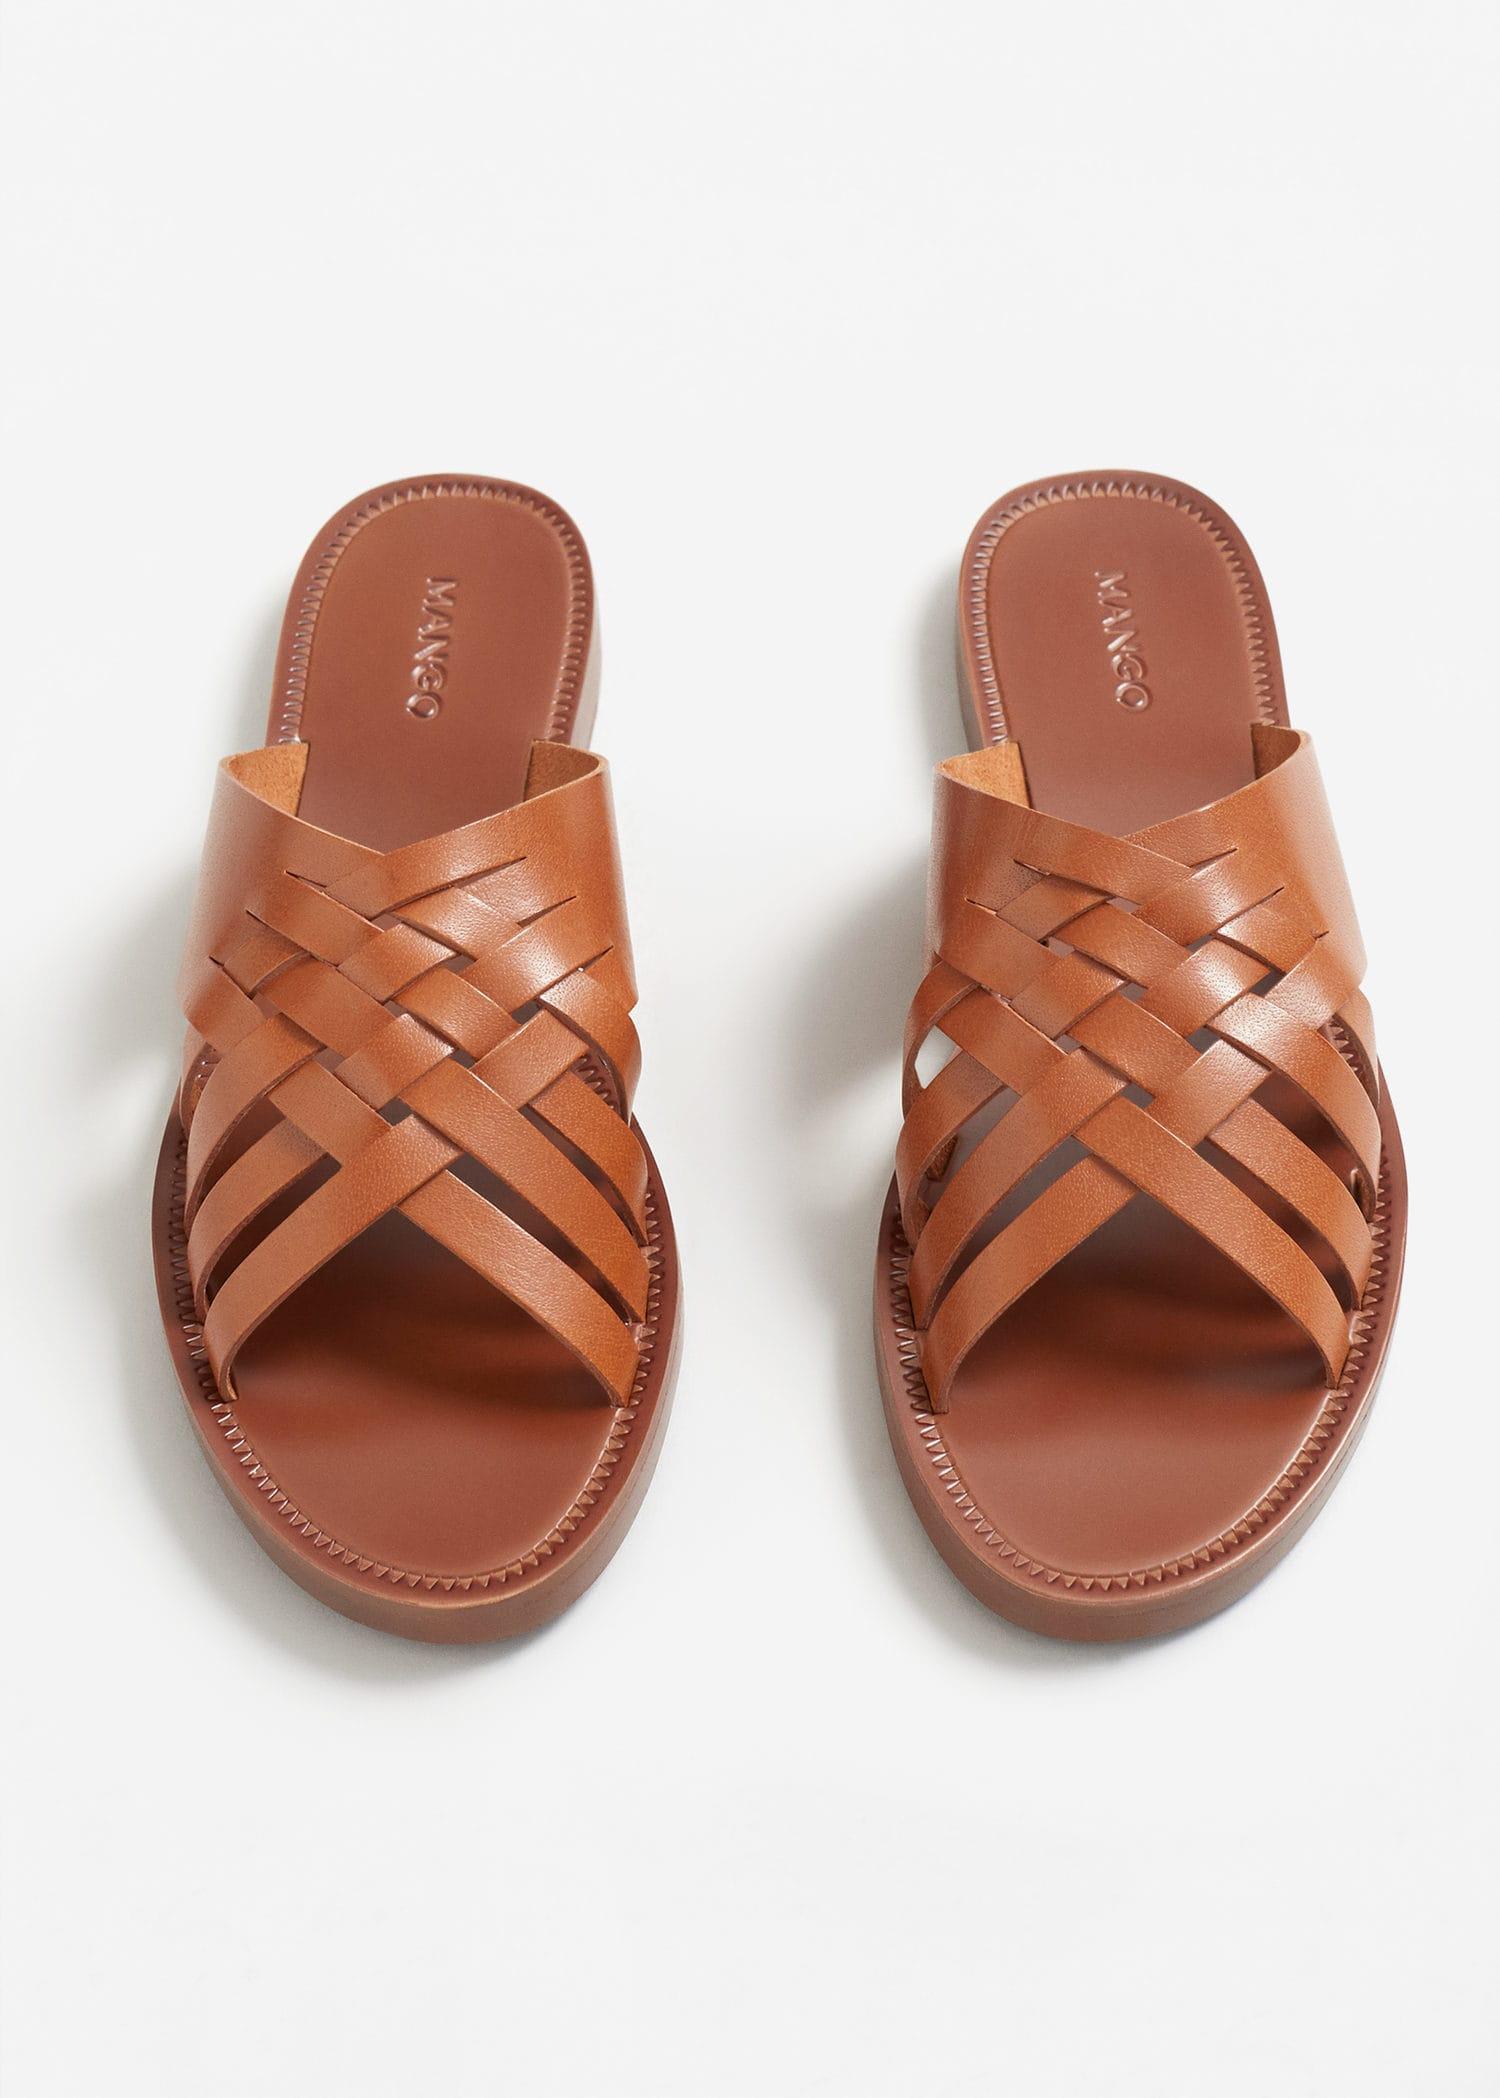 Lyst Mango Leather  Braided Sandals  in Brown